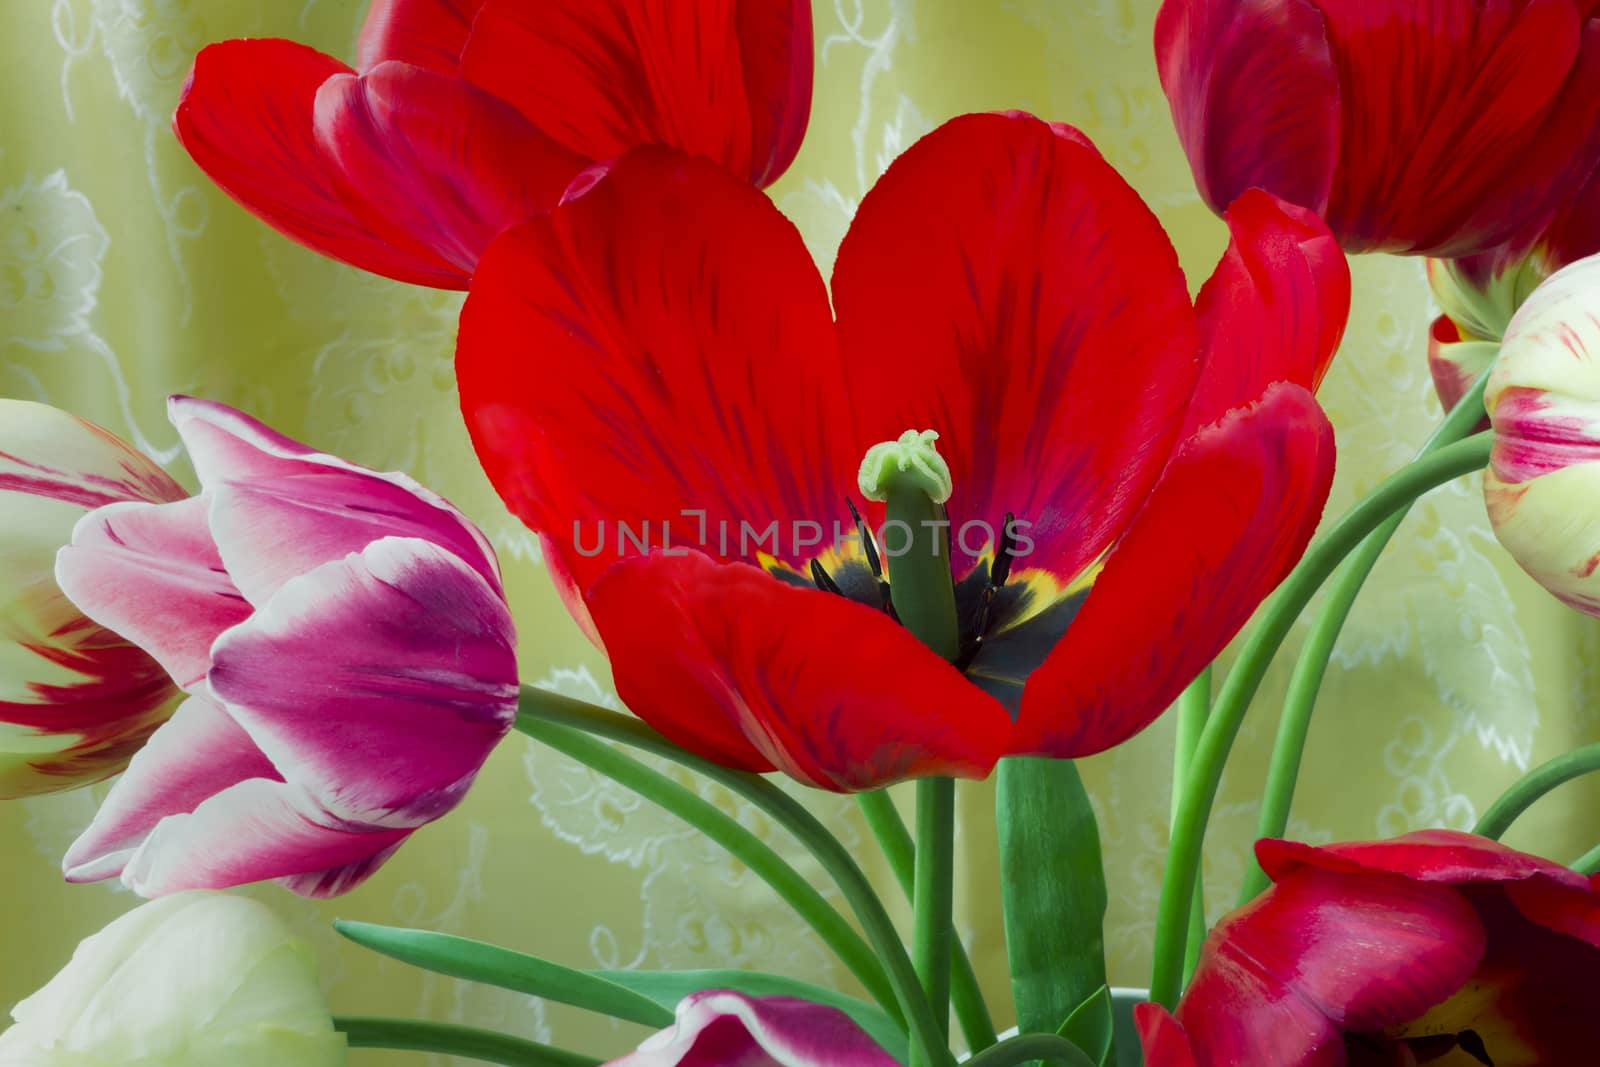 One big beautiful tulip of bright red color against the beautiful draped yellow silk. It is presented by a close up